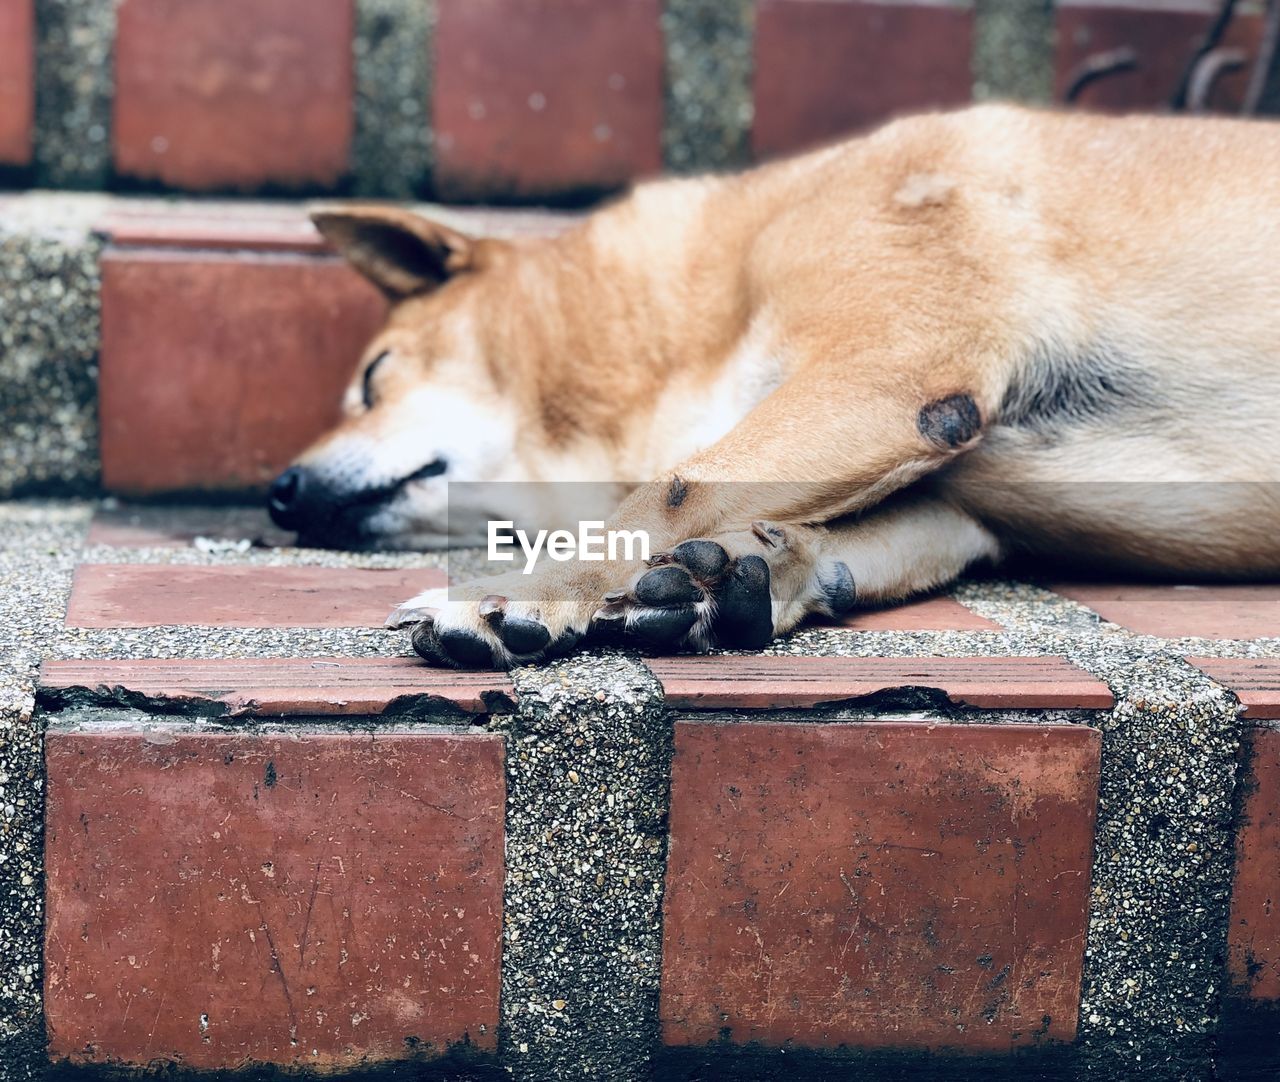 animal, animal themes, mammal, one animal, pet, dog, relaxation, domestic animals, puppy, sleeping, resting, no people, lying down, canine, carnivore, brick, wall, day